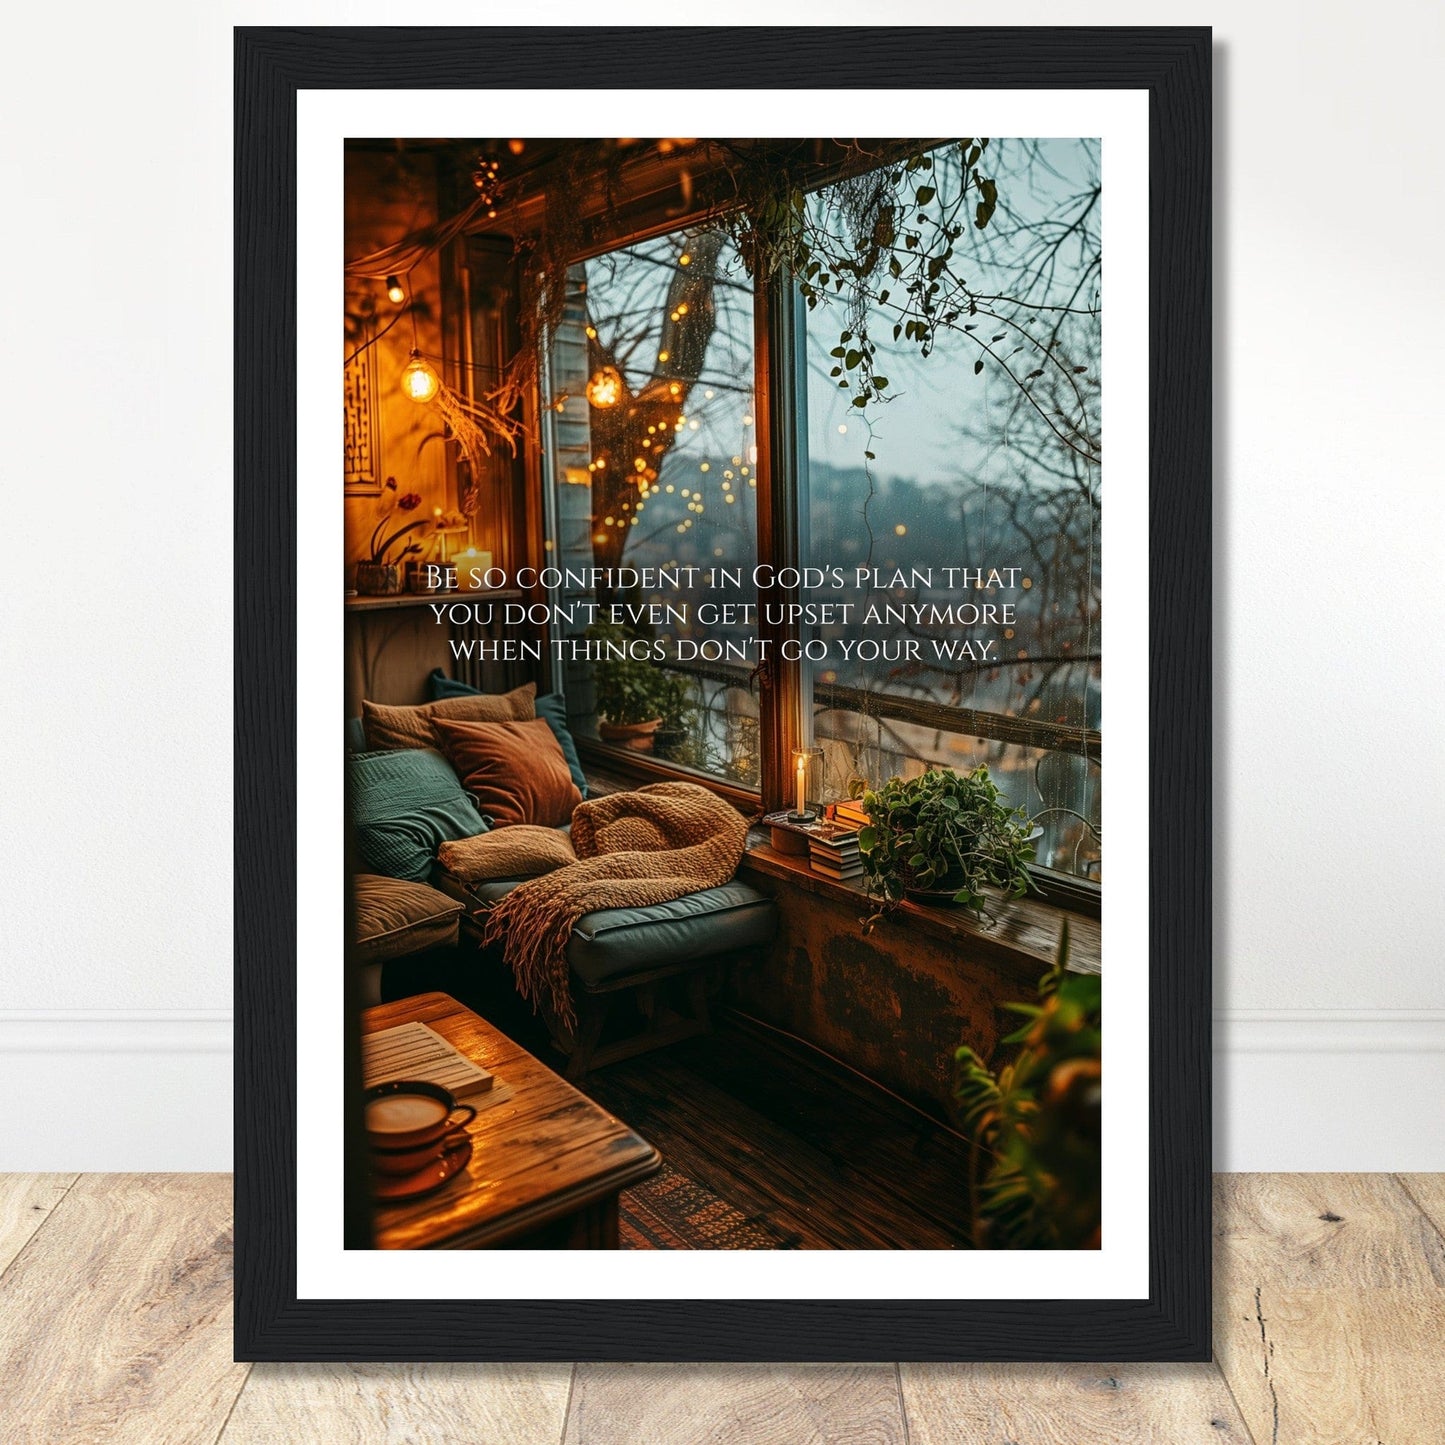 Coffee With My Father Print Material A4 21x29.7 cm / 8x12″ / Premium Matte Paper Wooden Framed Poster / Black frame Premium Matte Paper Wooden Framed Poster